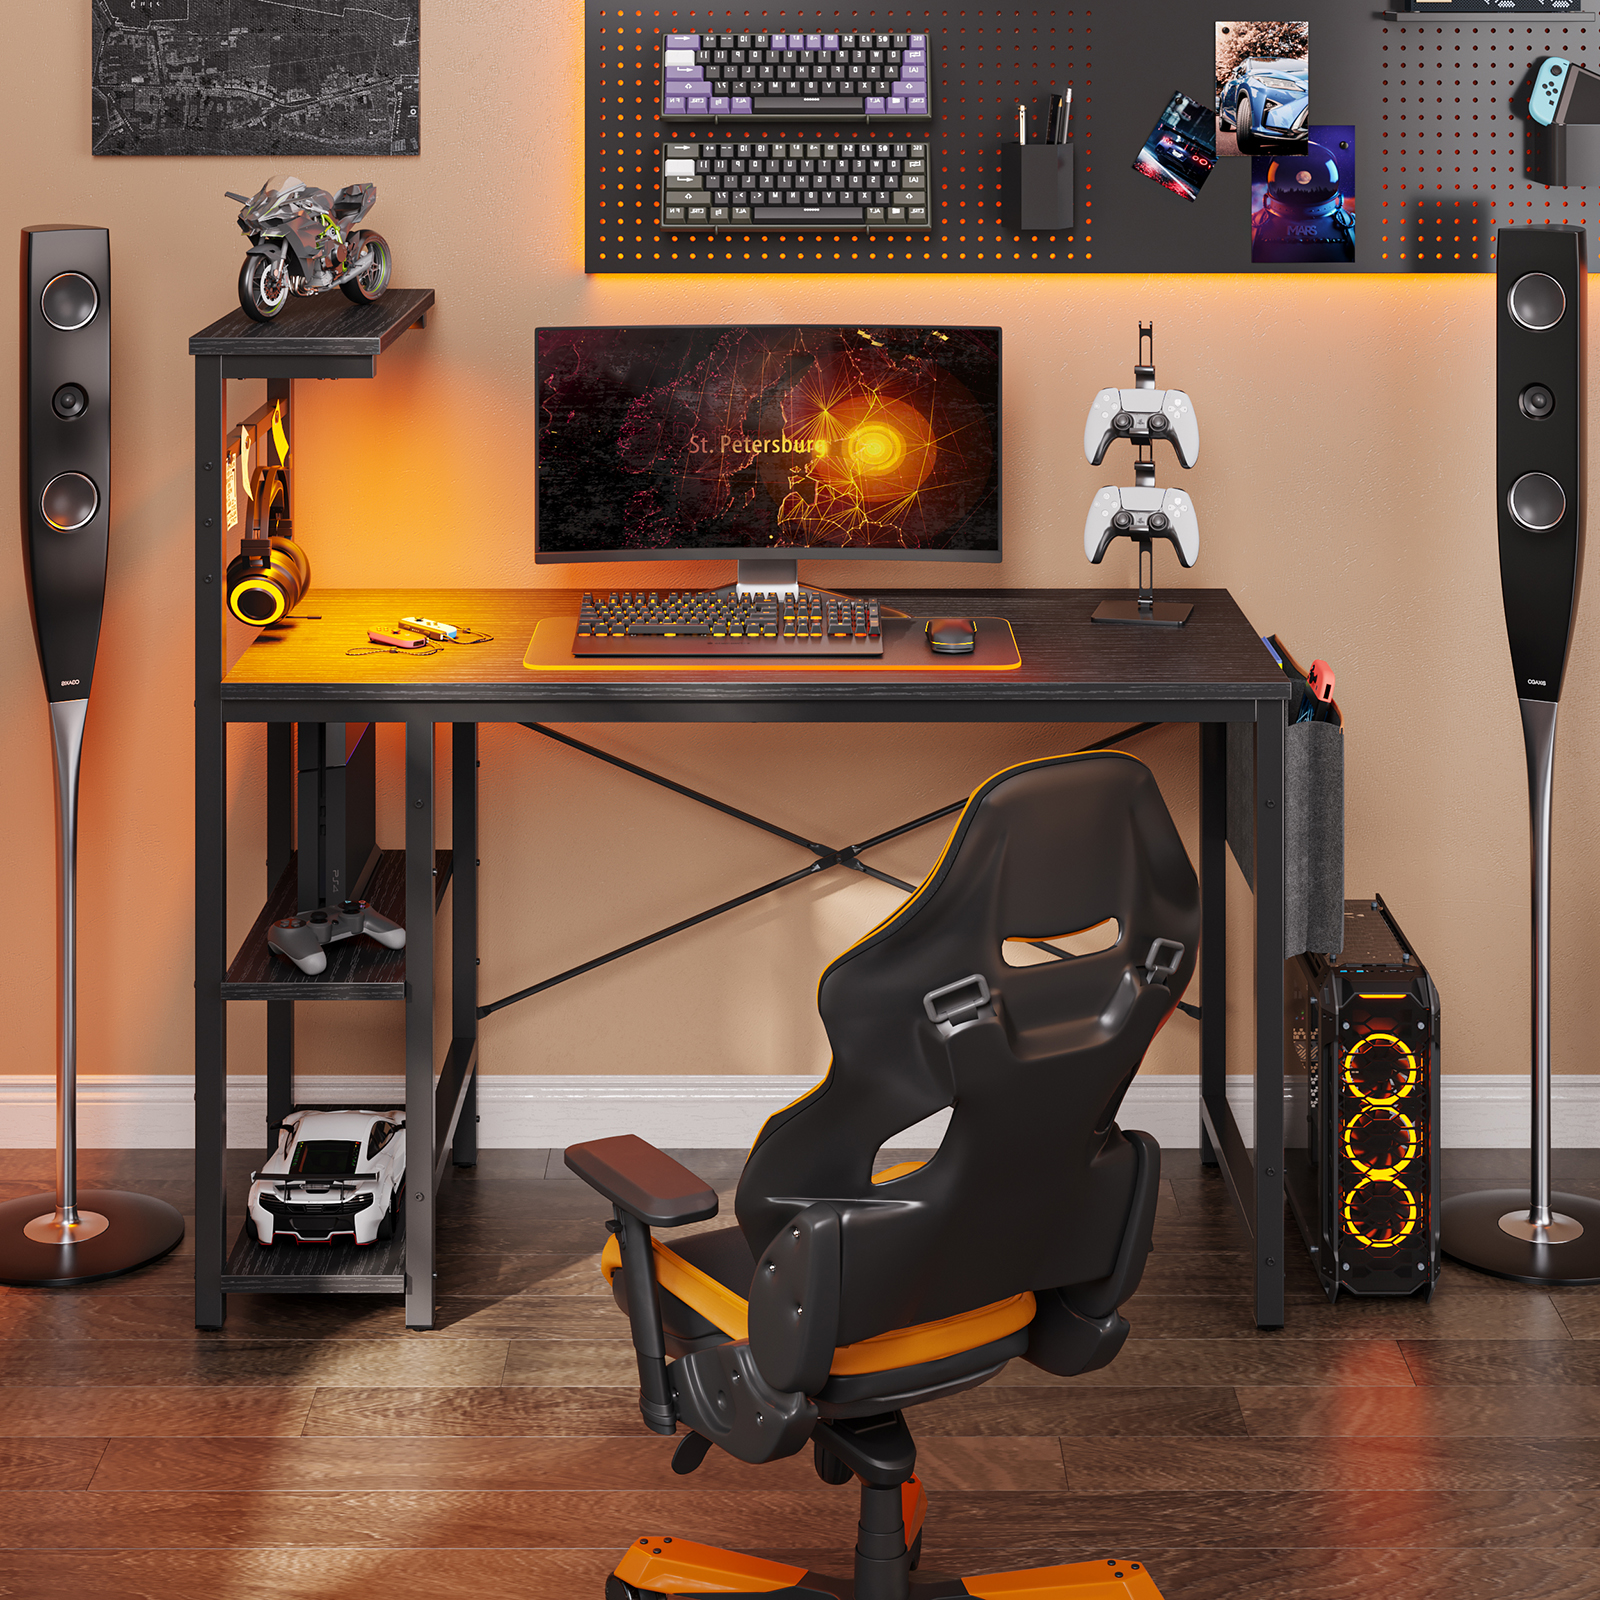 Bestier Reversible 44 inch Computer Desk with LED Lights Gaming Desk with 4 Tier Shelves Black - image 3 of 9